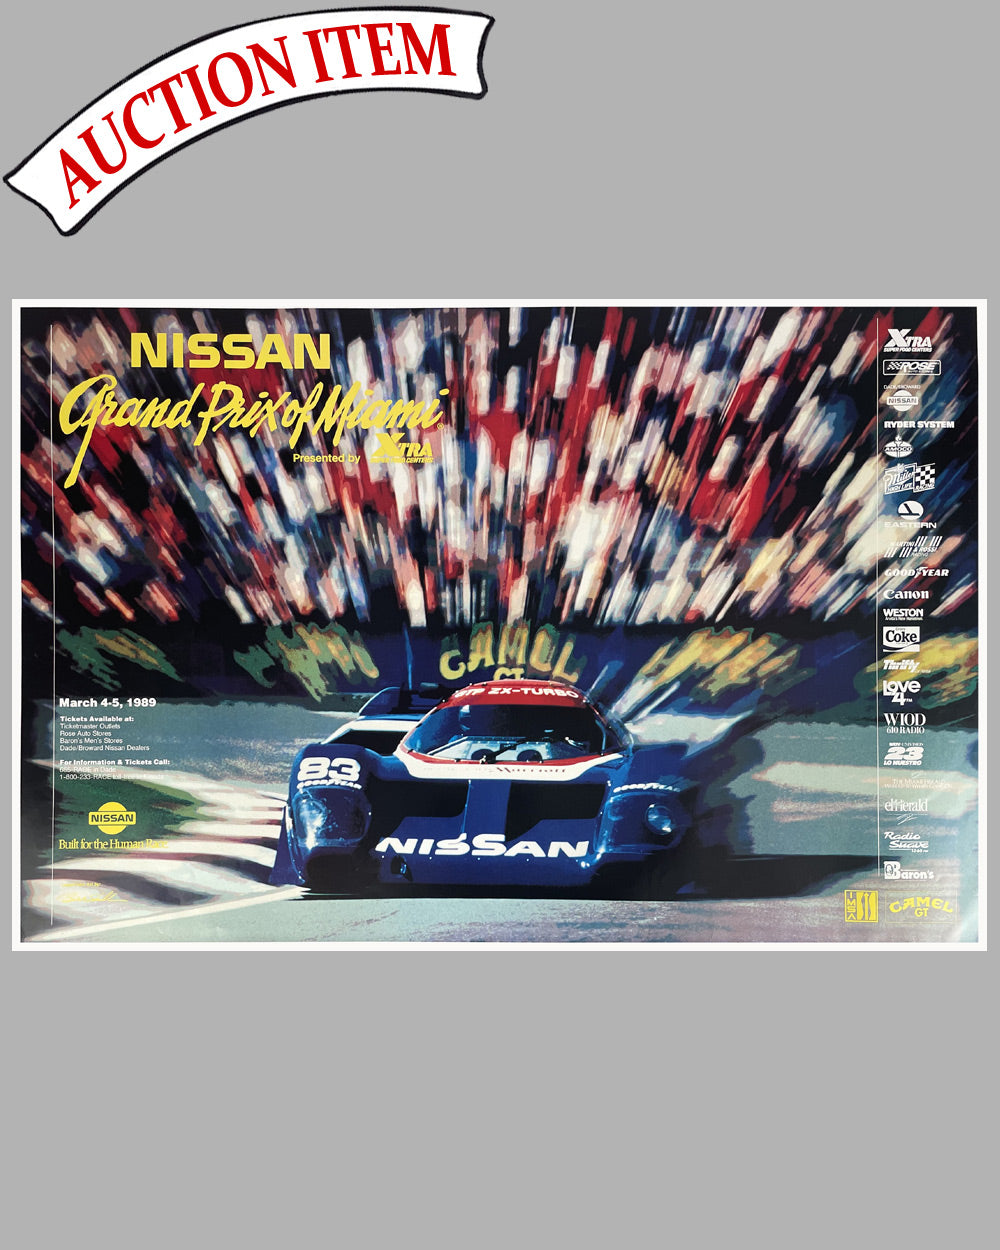 16 - Grand Prix of Miami 1989 official race poster, photograph by Bill Stahl